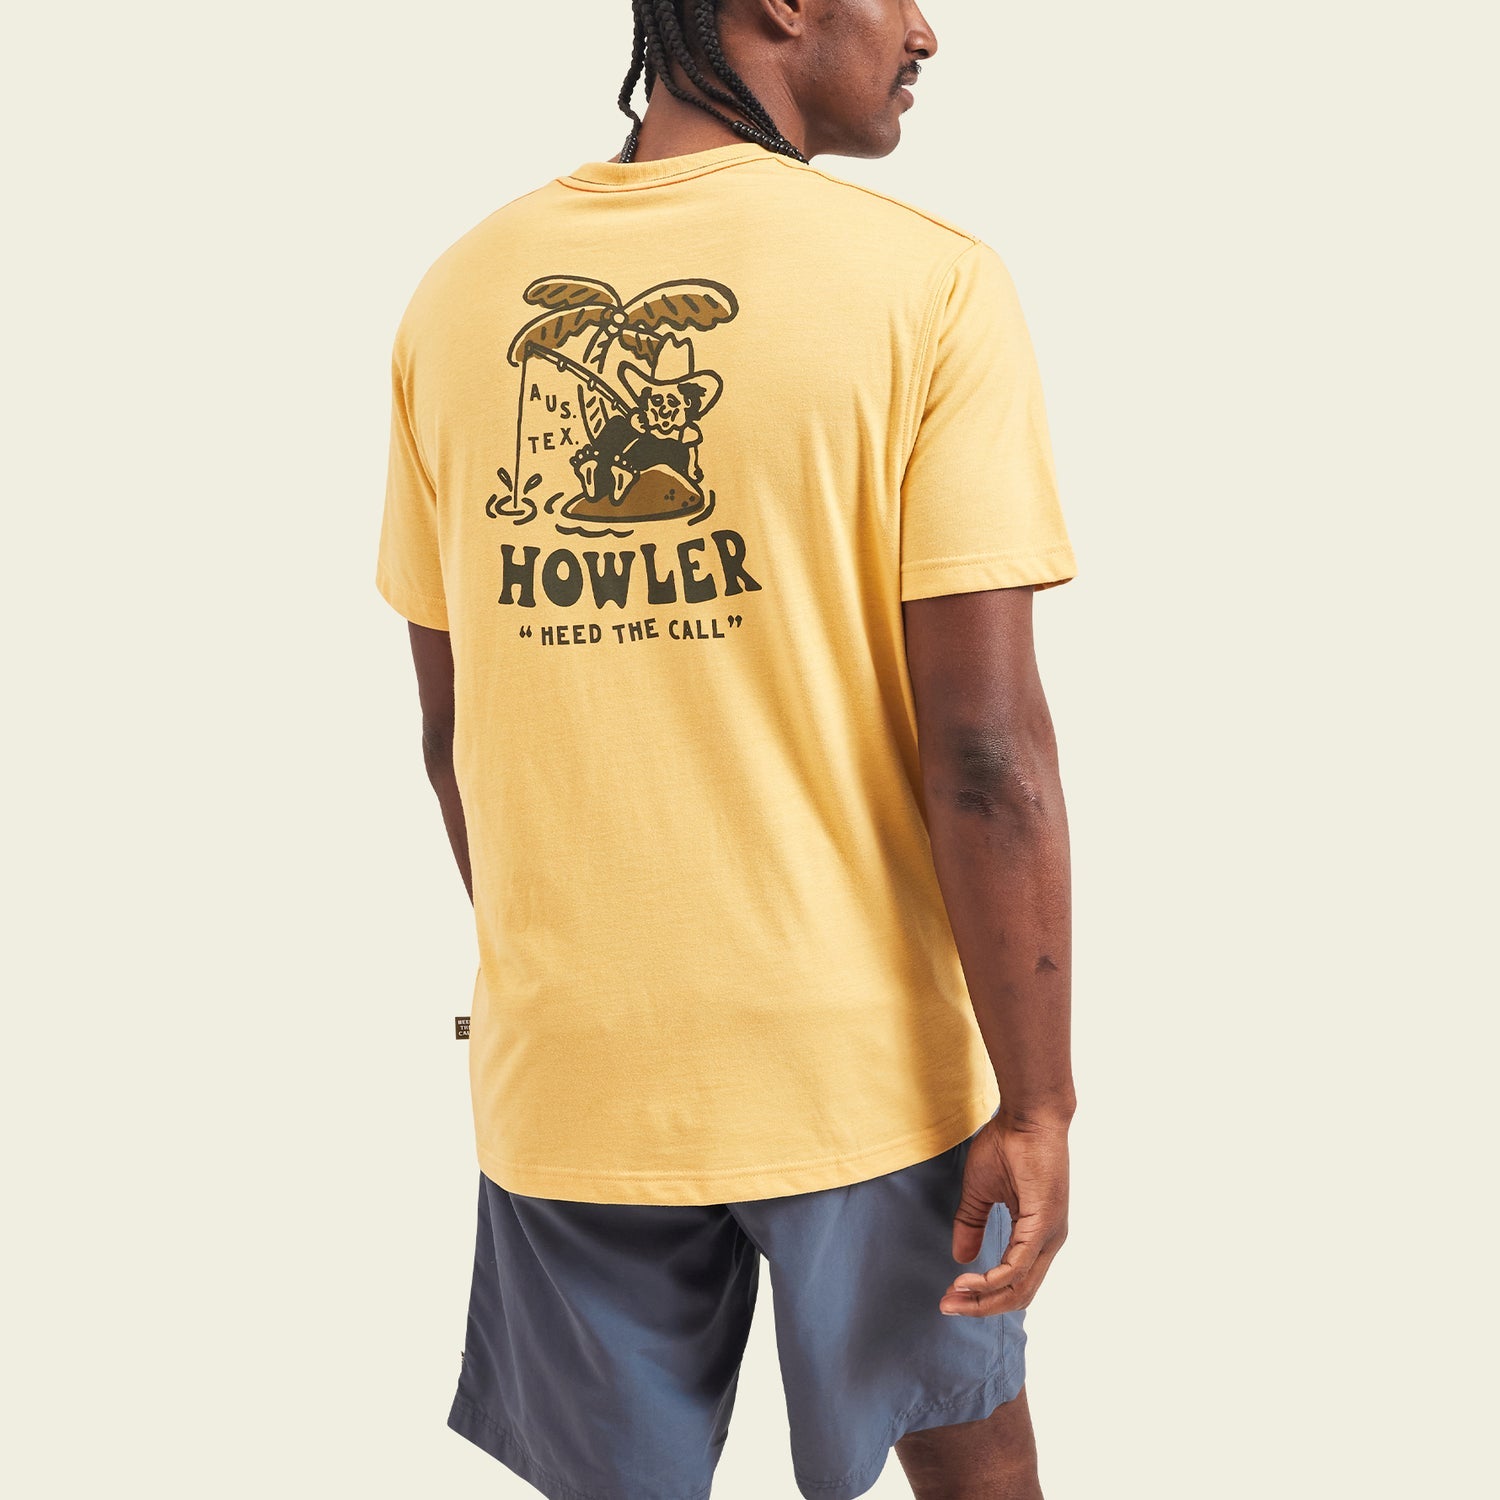 Howler Brothers Island Time T-Shirt - 88 Gear